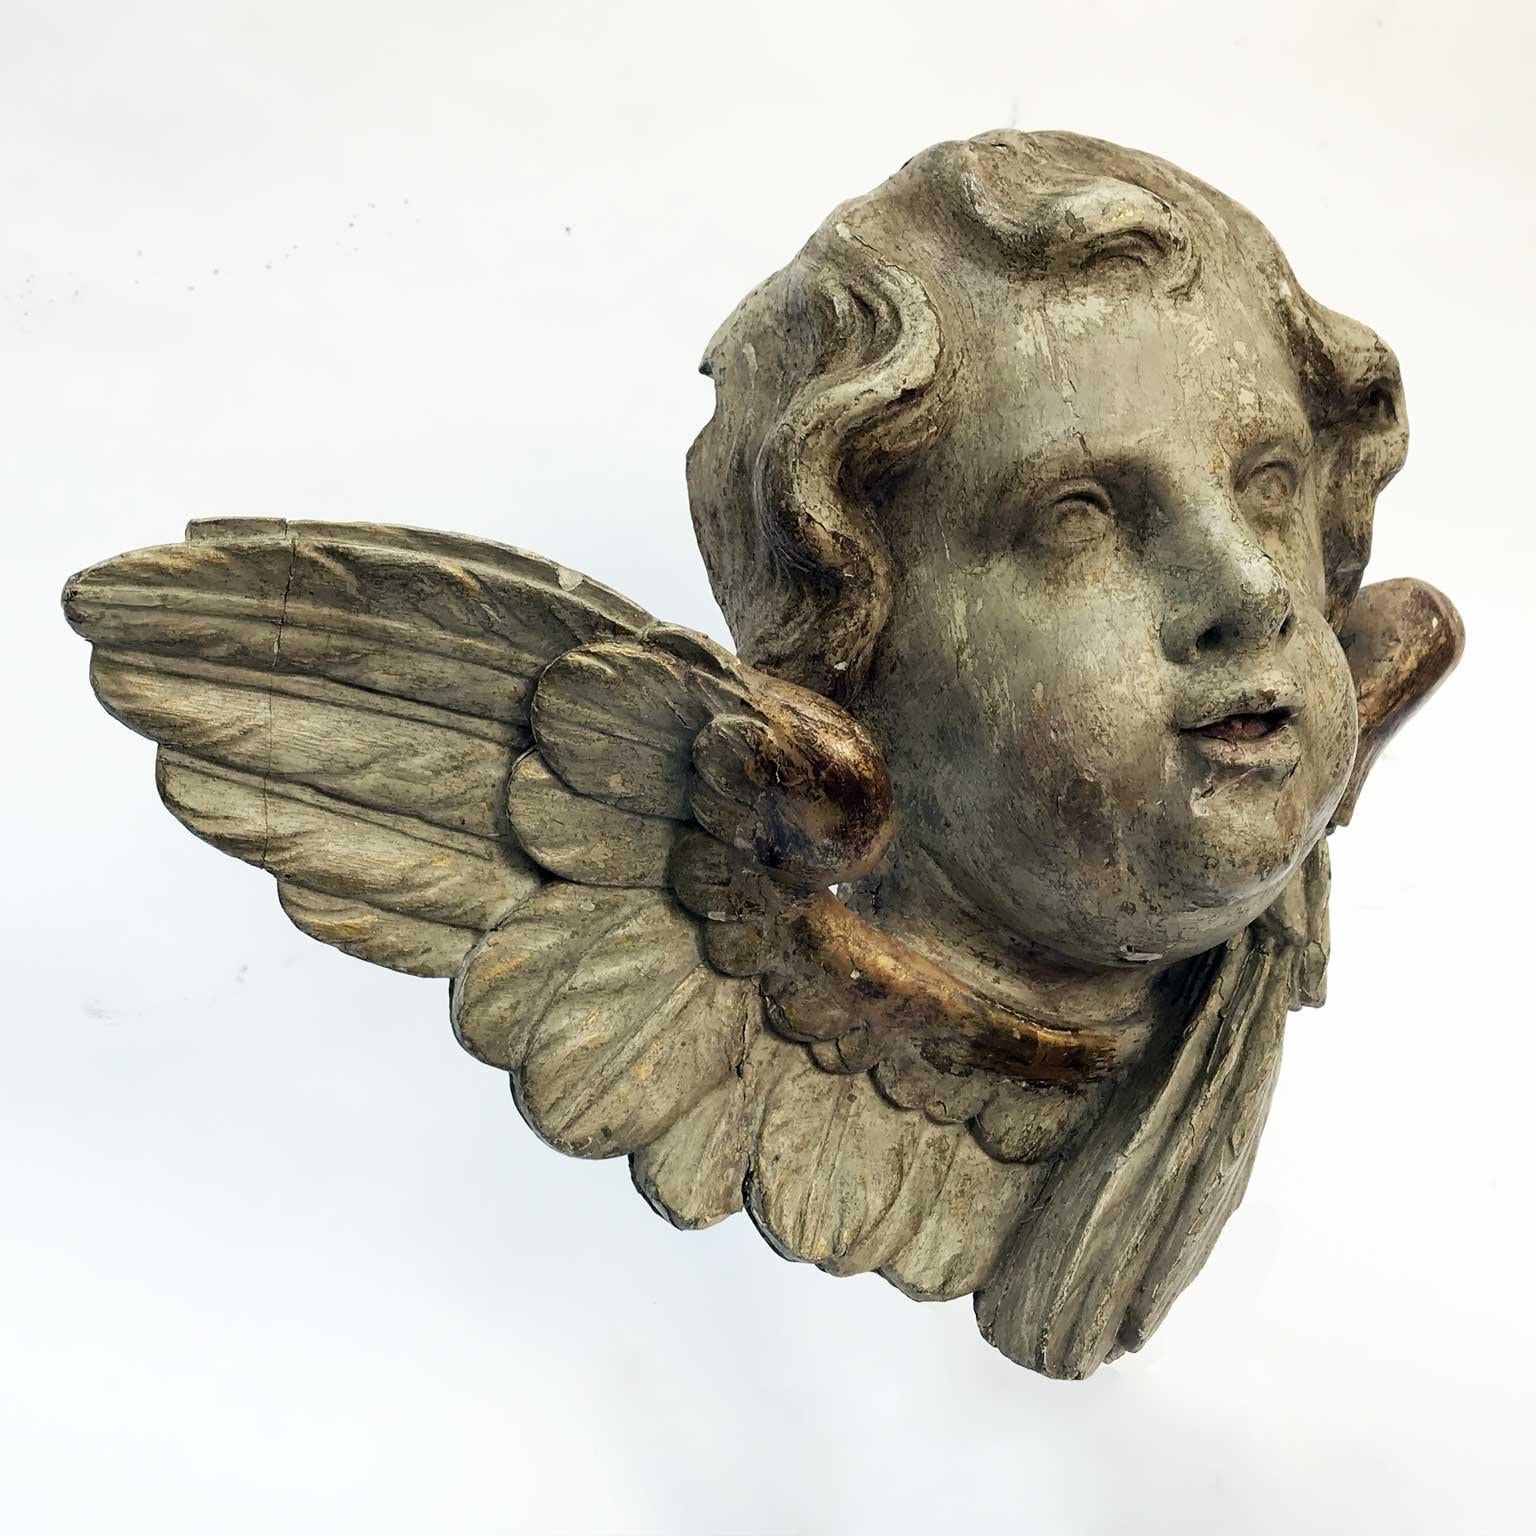 Hand-Carved Pair of Italian Cherub Head Sculptures 18th Century Carved Winged Putti Heads